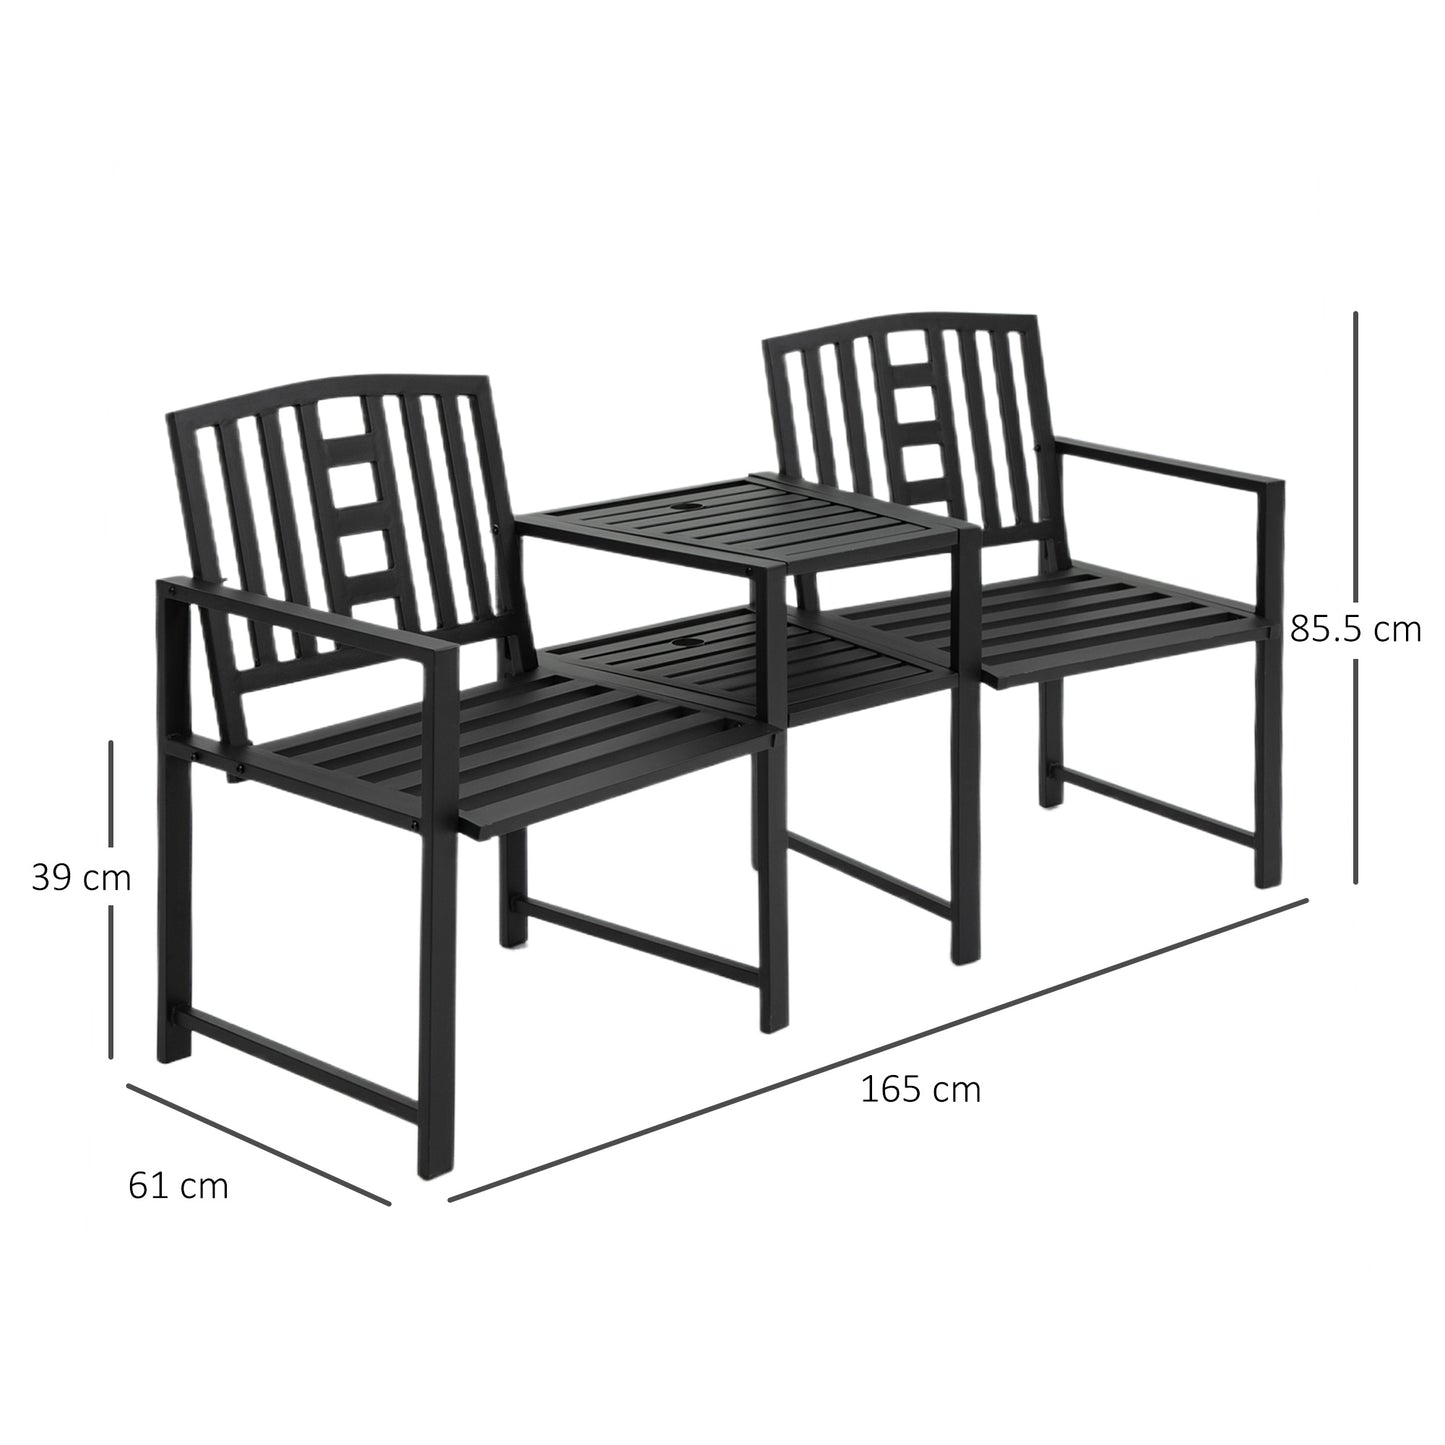 Outsunny Patio Tete-a-tete Chair 2 Seat Bench Middle Coffee Table w/ Umbrella Hole for Outdoors Decorative Slatted Design Steel Frame Black 2-Seater Backyard Porch